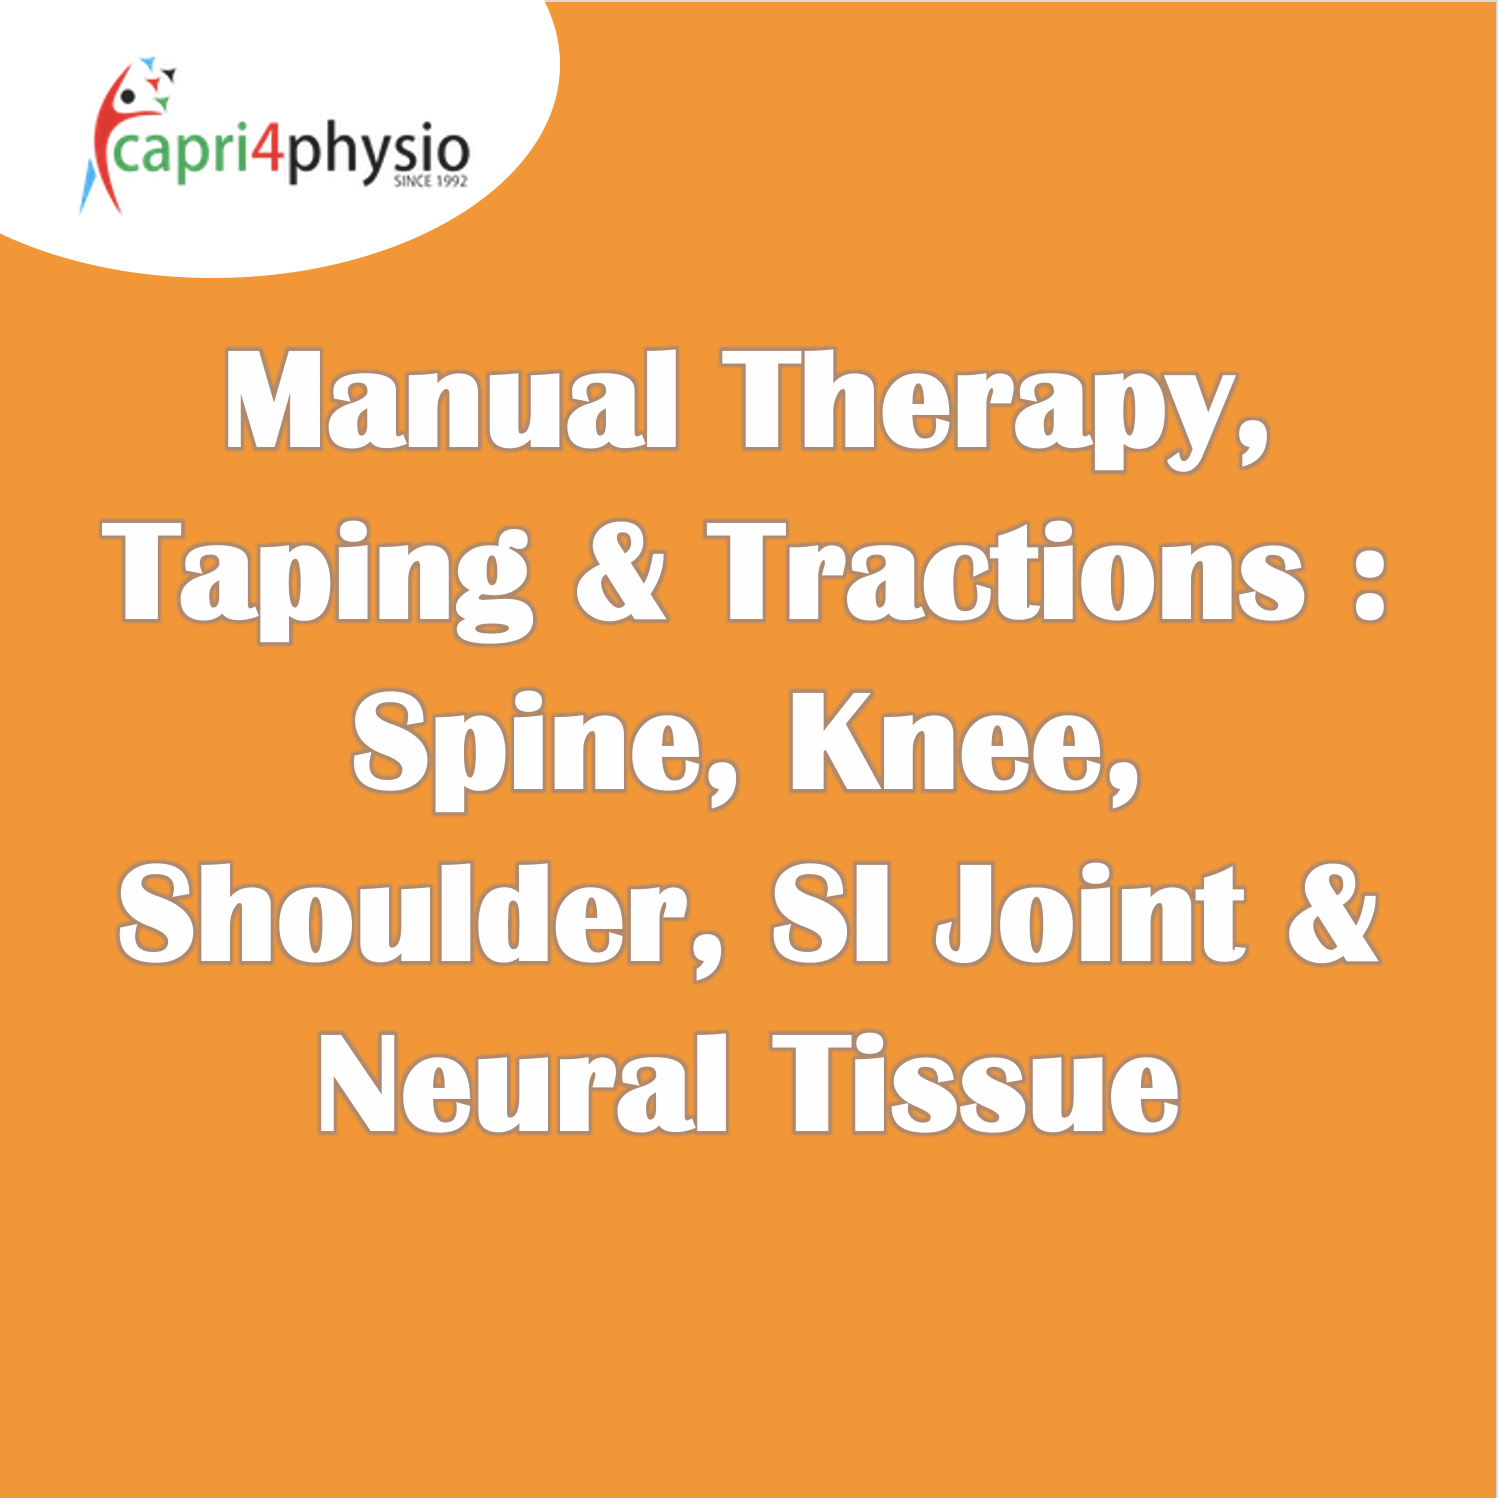 Manual Therapy, Taping & Tractions : Spine, Knee, Shoulder, SI Joint & Neural Tissue